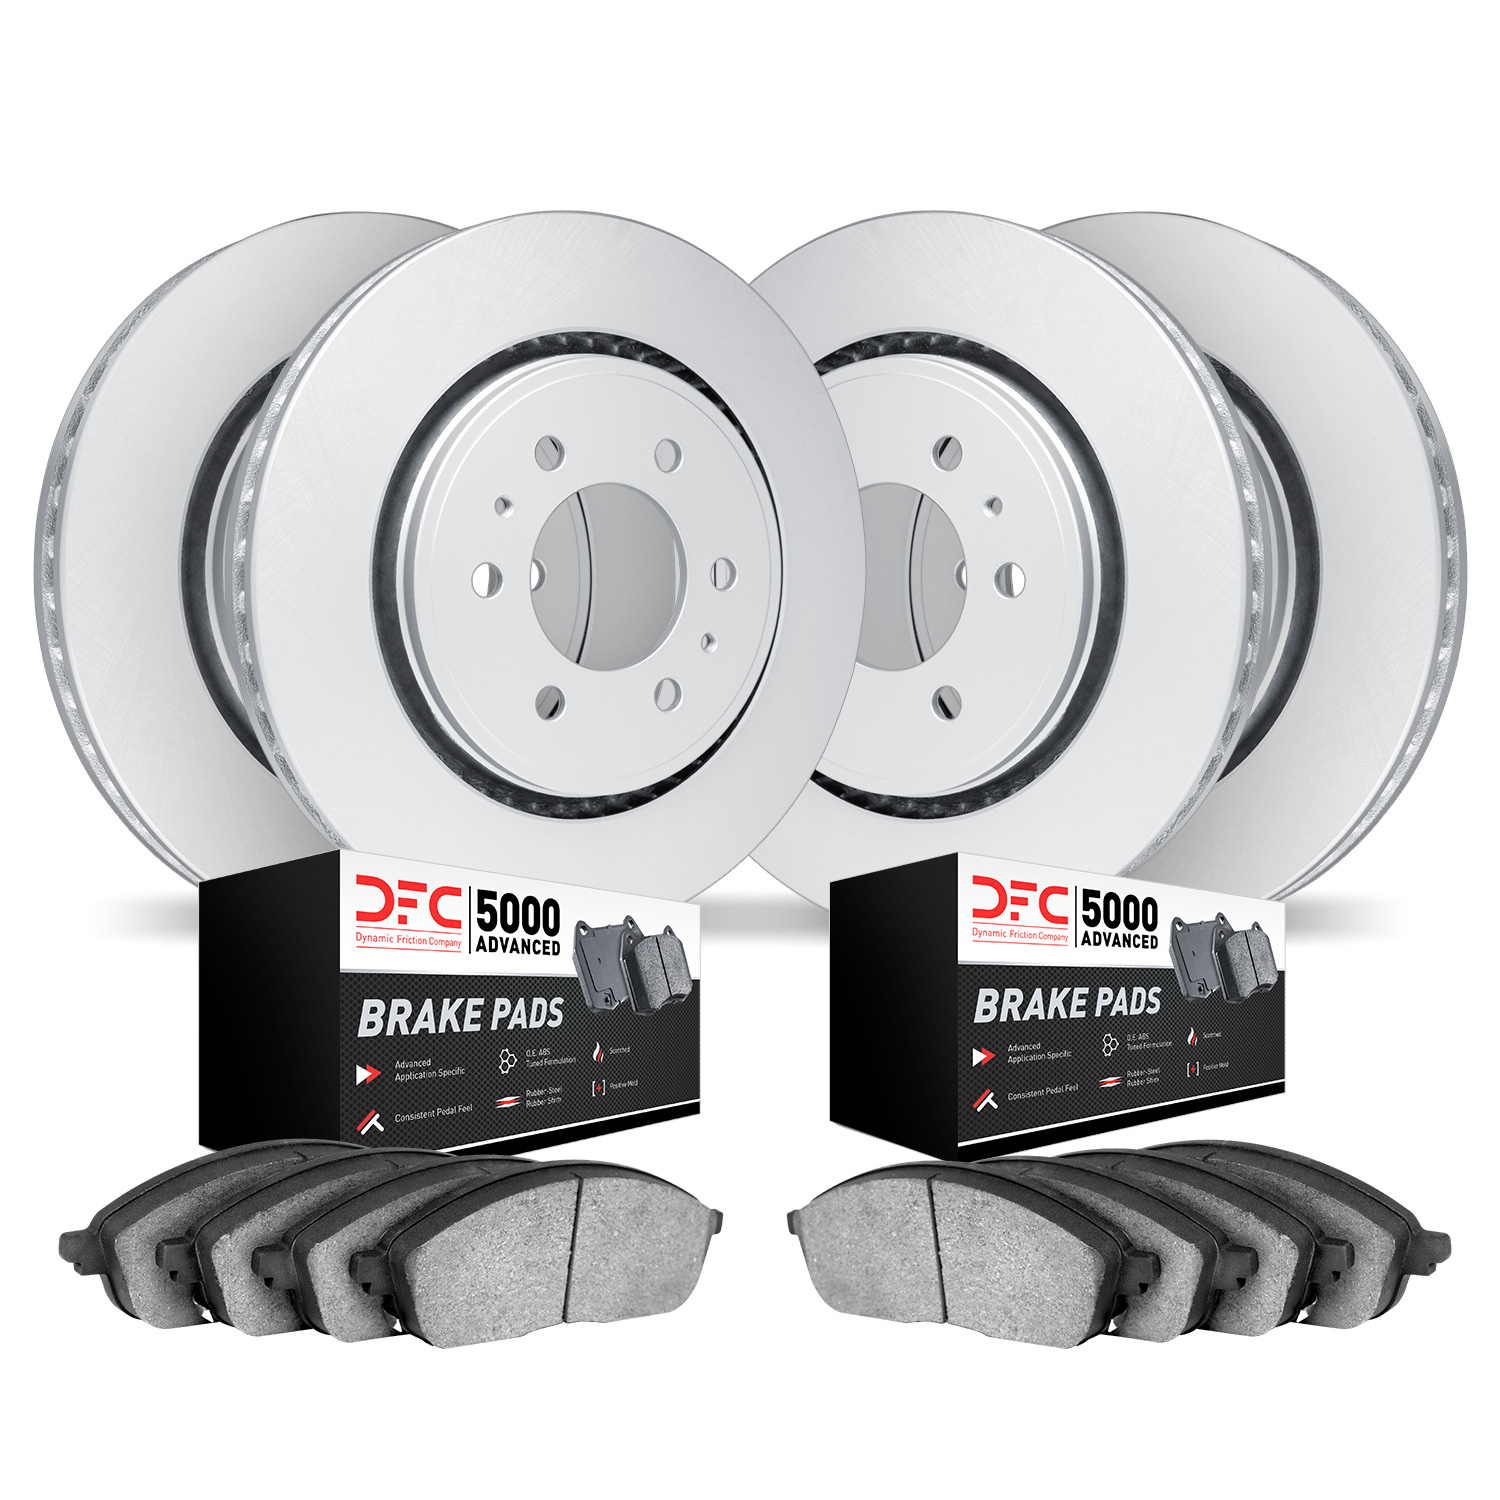 4504-54098 Geospec Brake Rotors w/5000 Advanced Brake Pads Kit, 2010-2011 Ford/Lincoln/Mercury/Mazda, Position: Front and Rear